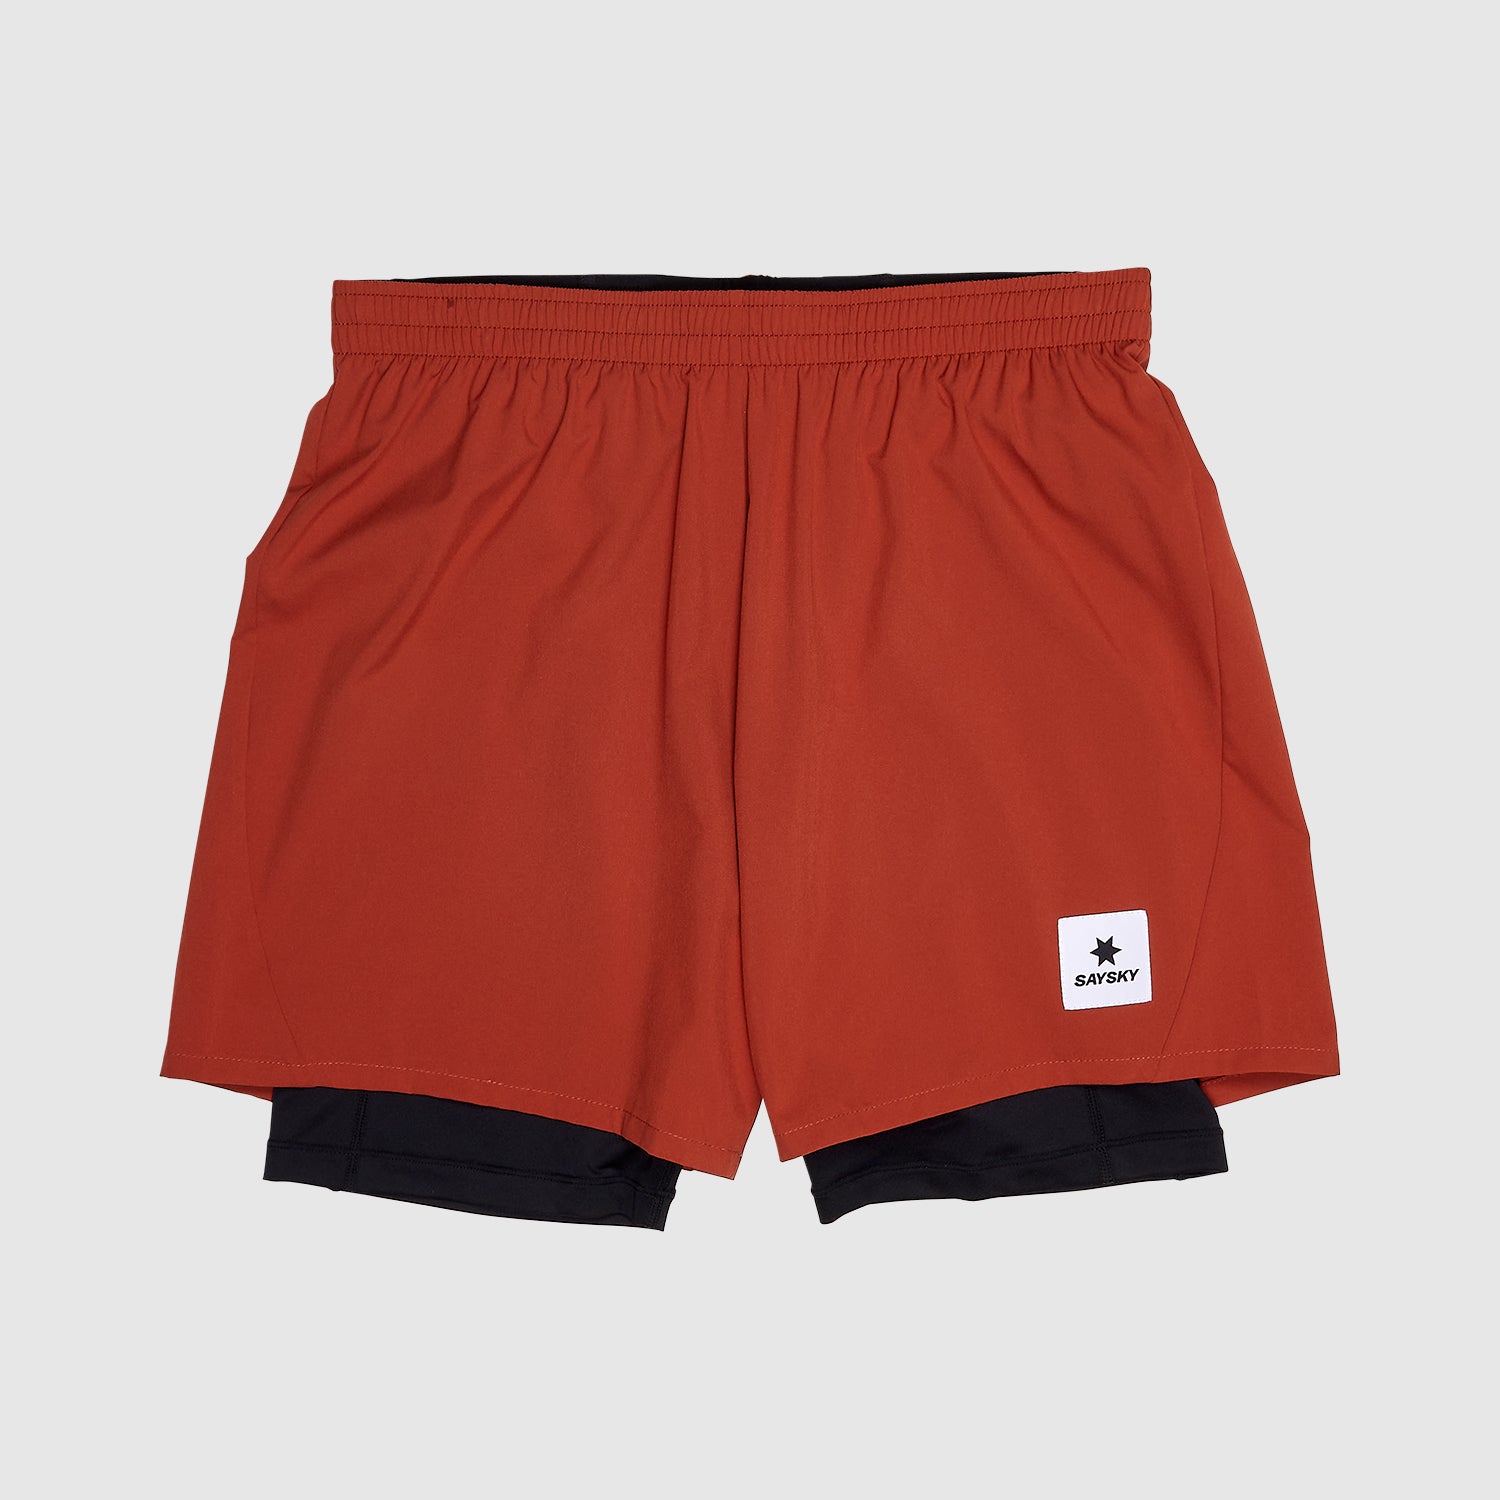 SAYSKY Pace 2 in 1 Shorts 5'' –